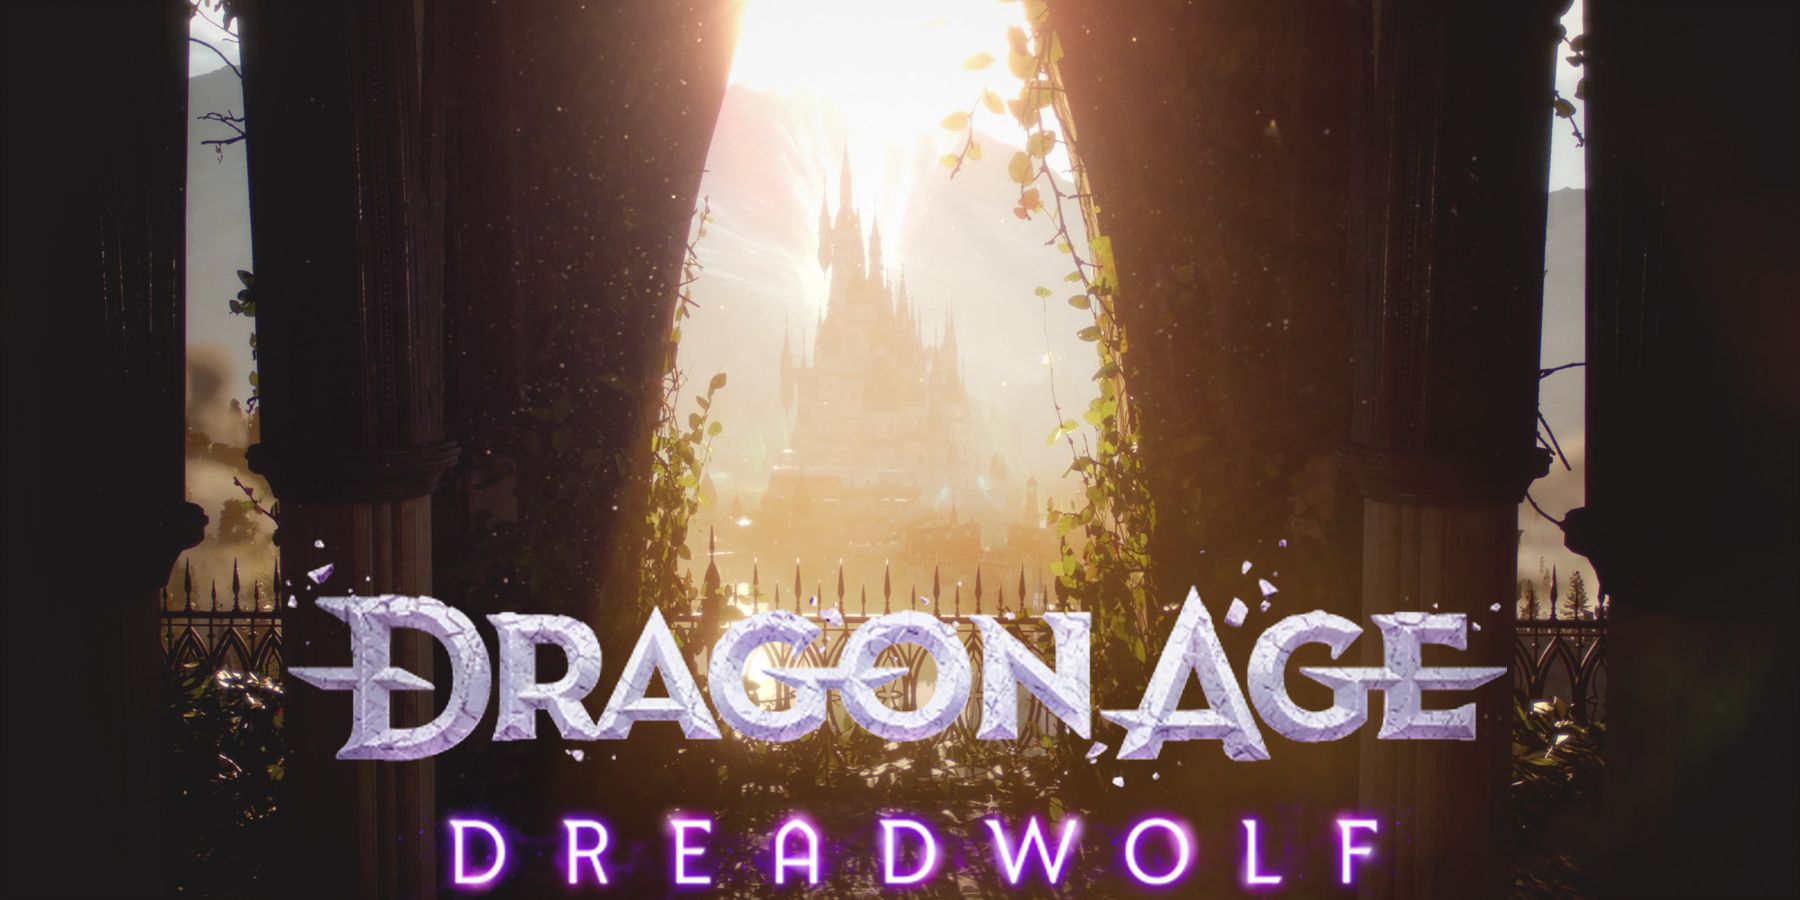 Dragon Age: Dreadwolf developers at BioWare suing for severance - Polygon